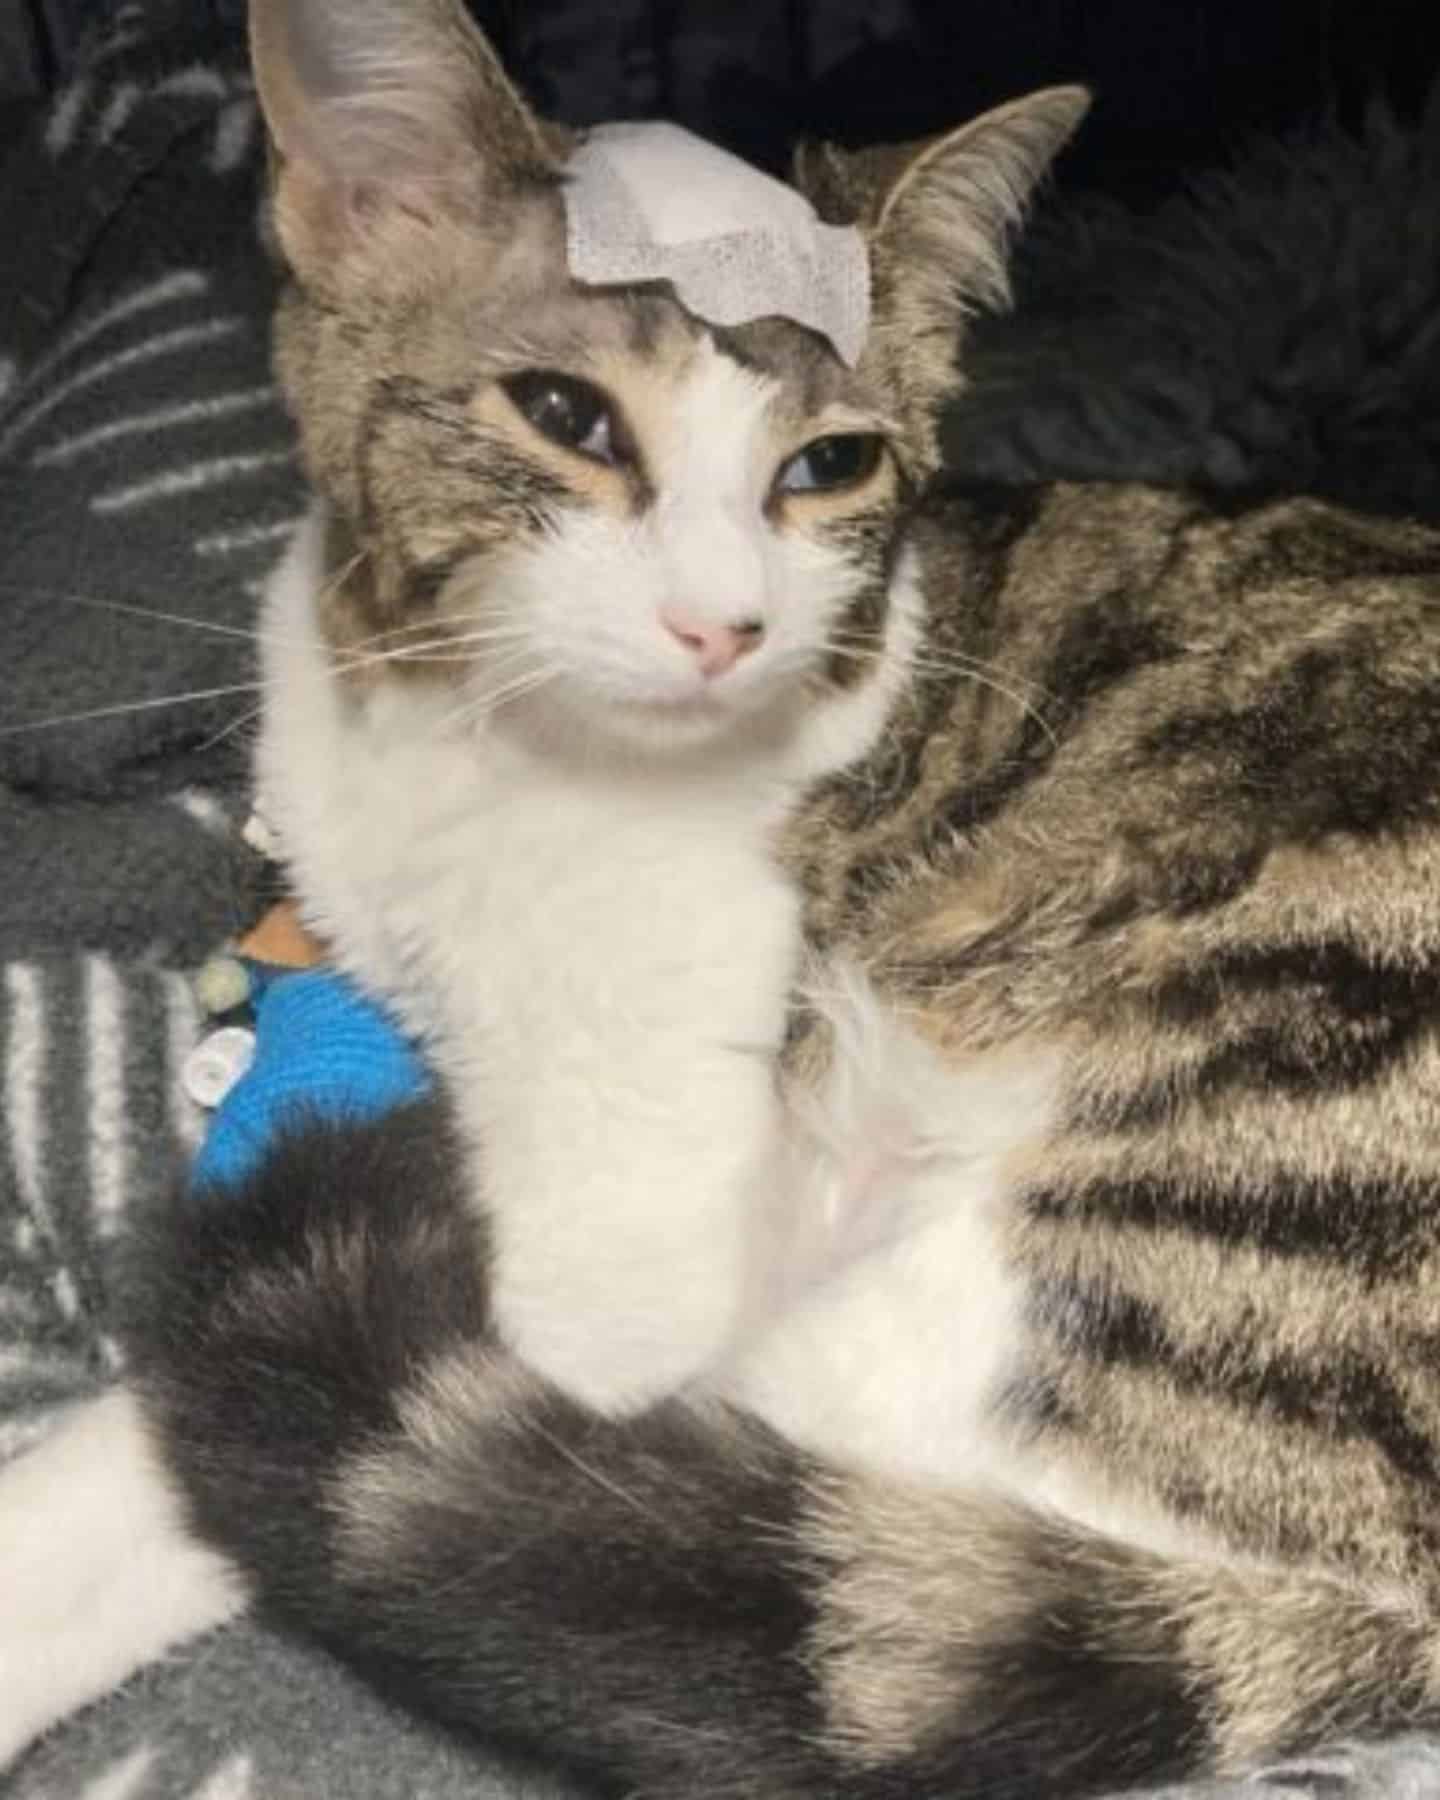 cat with a bandage on head